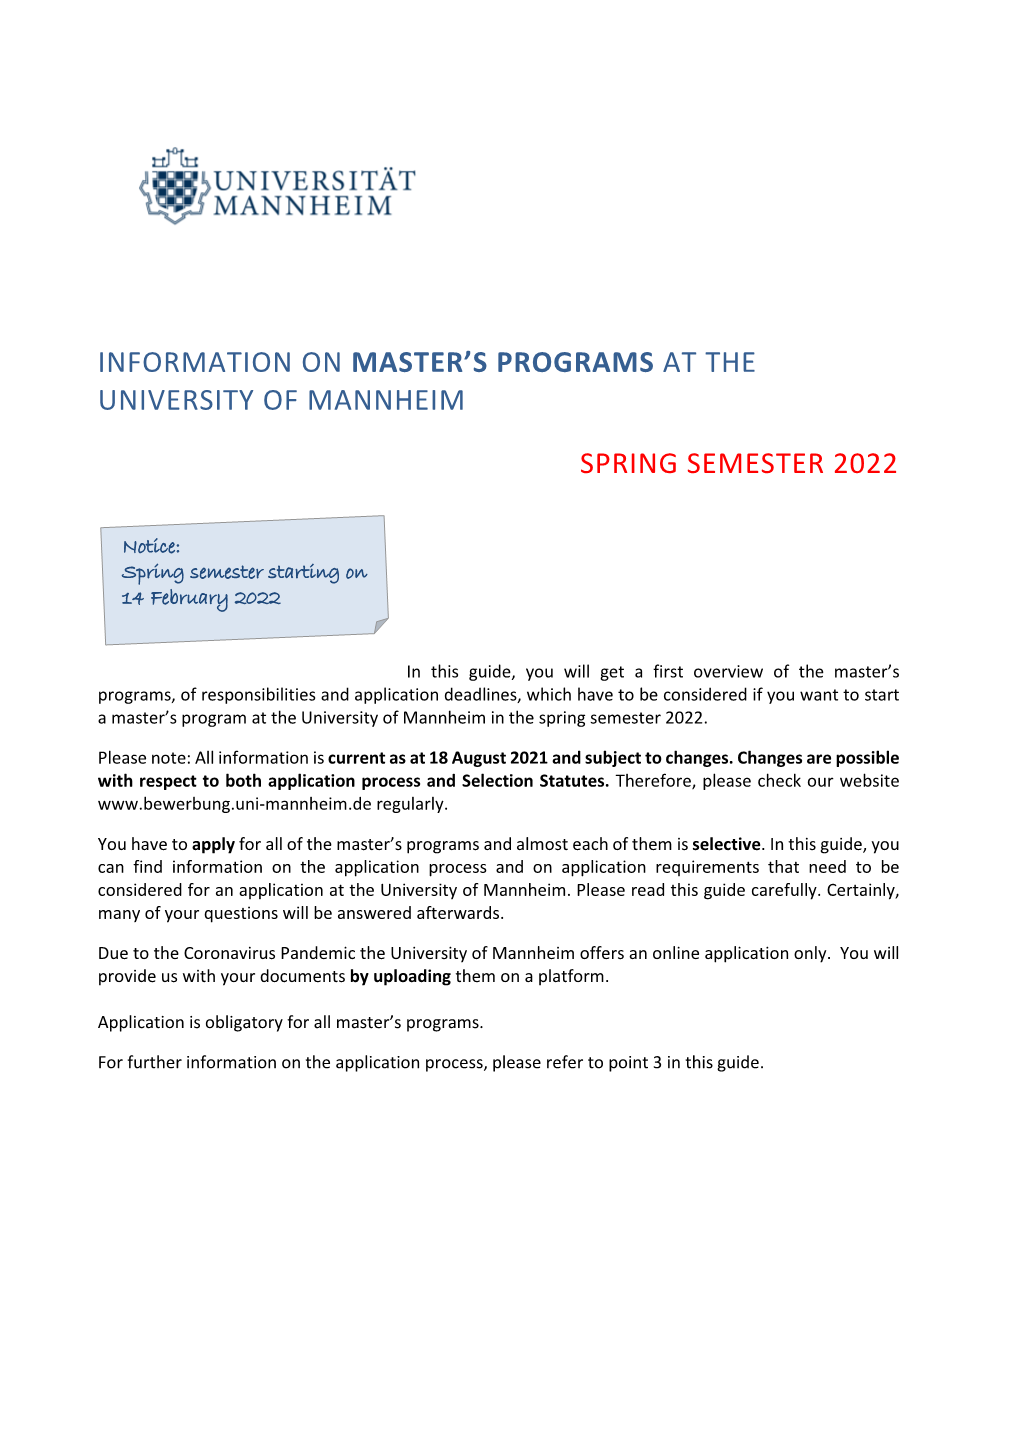 Information on Master's Programs at the University of Mannheim